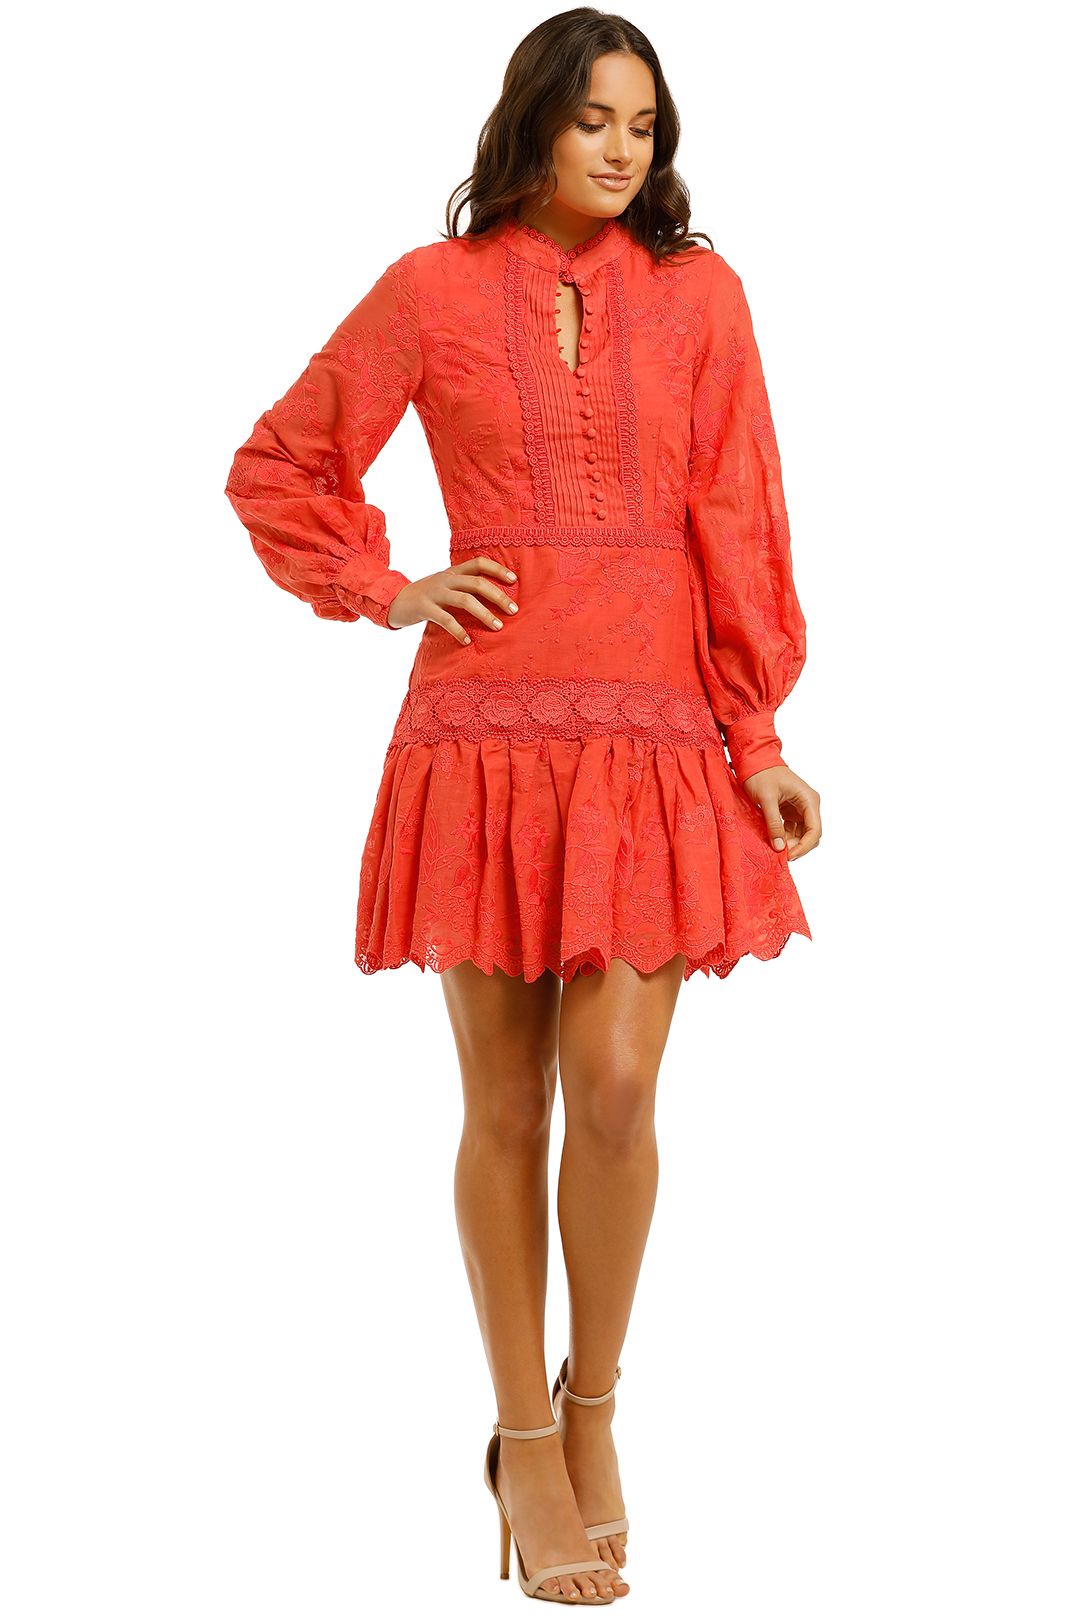 Ministry-of-Style-Daphne-Mini-Dress-Coral-Side